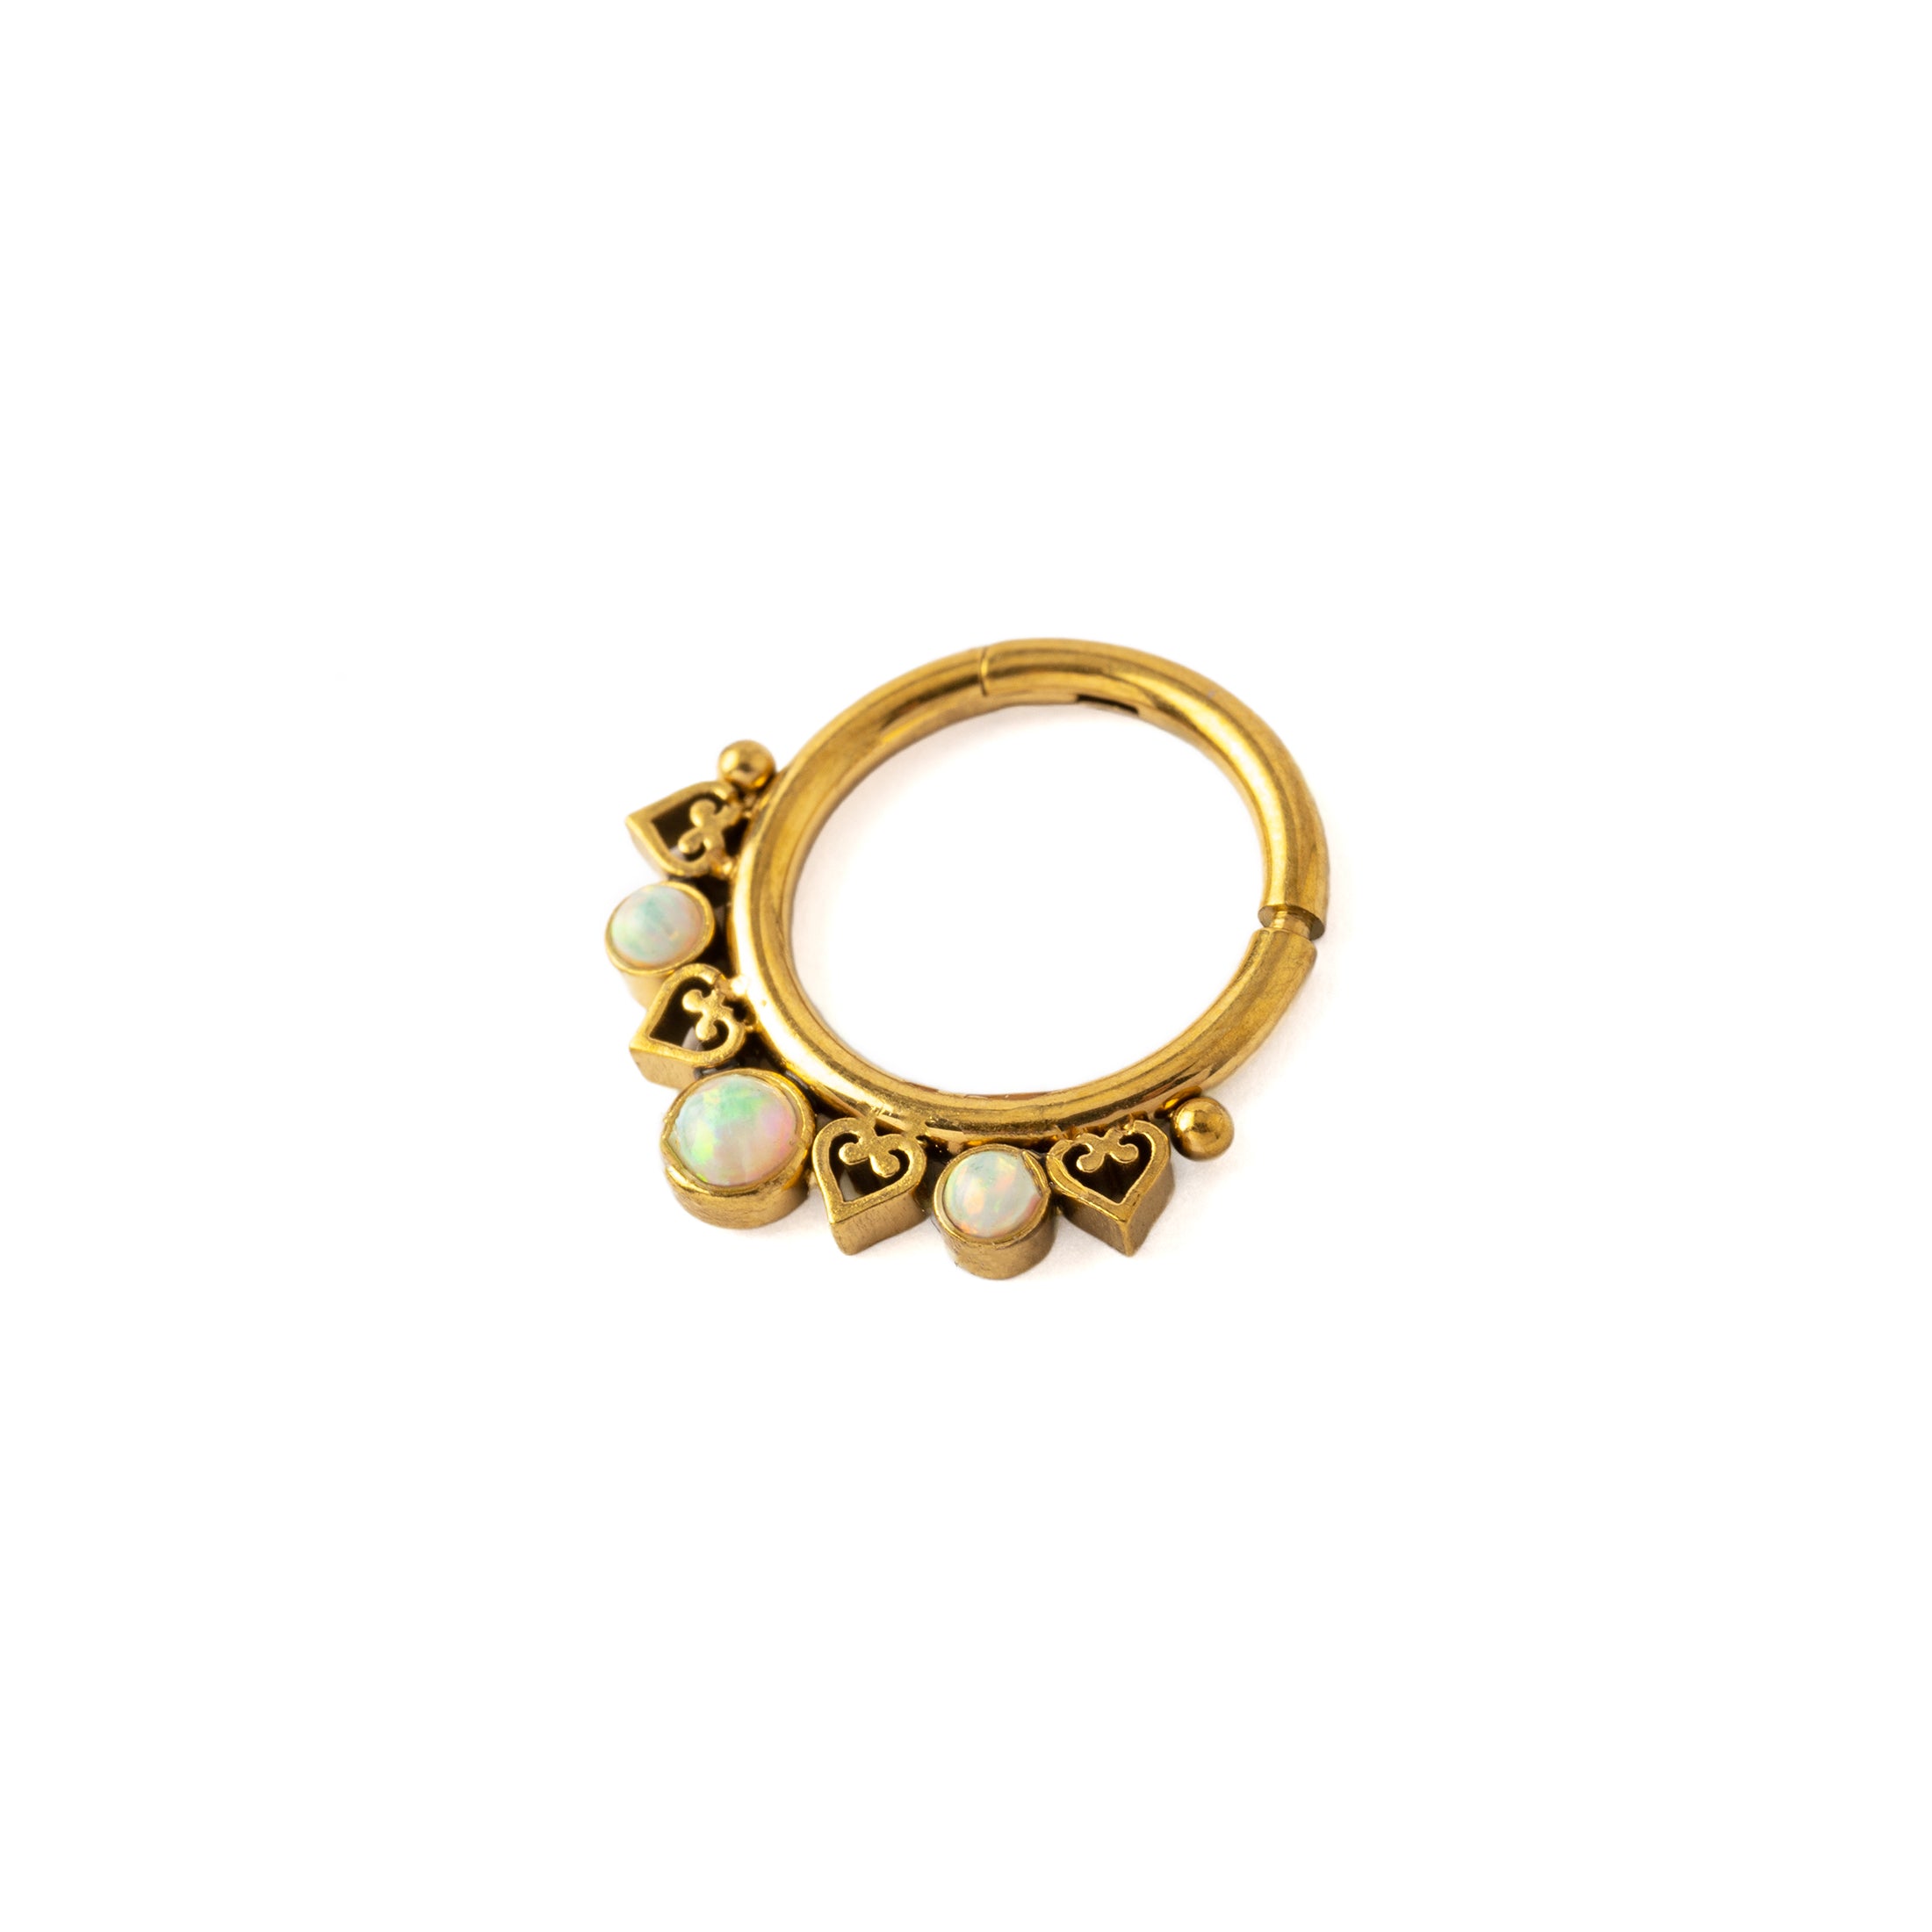 Golden Neptune Septum Clicker with White Opal right side view